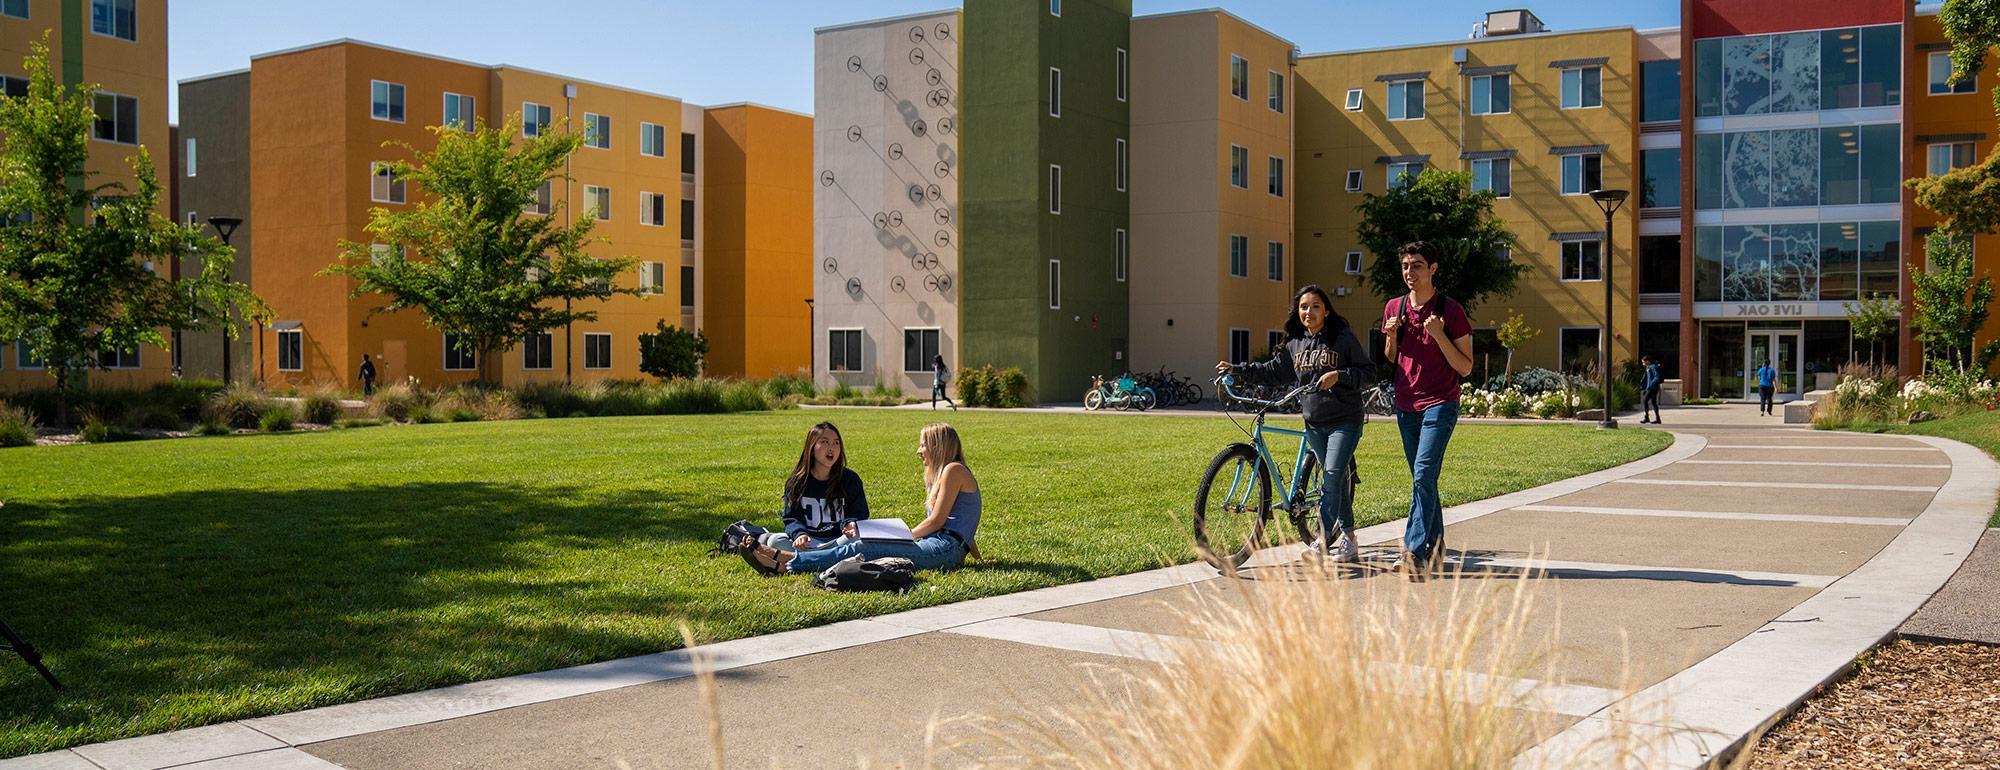 two student walking a bike while two more students are sitting on the grass in front of the residence halls